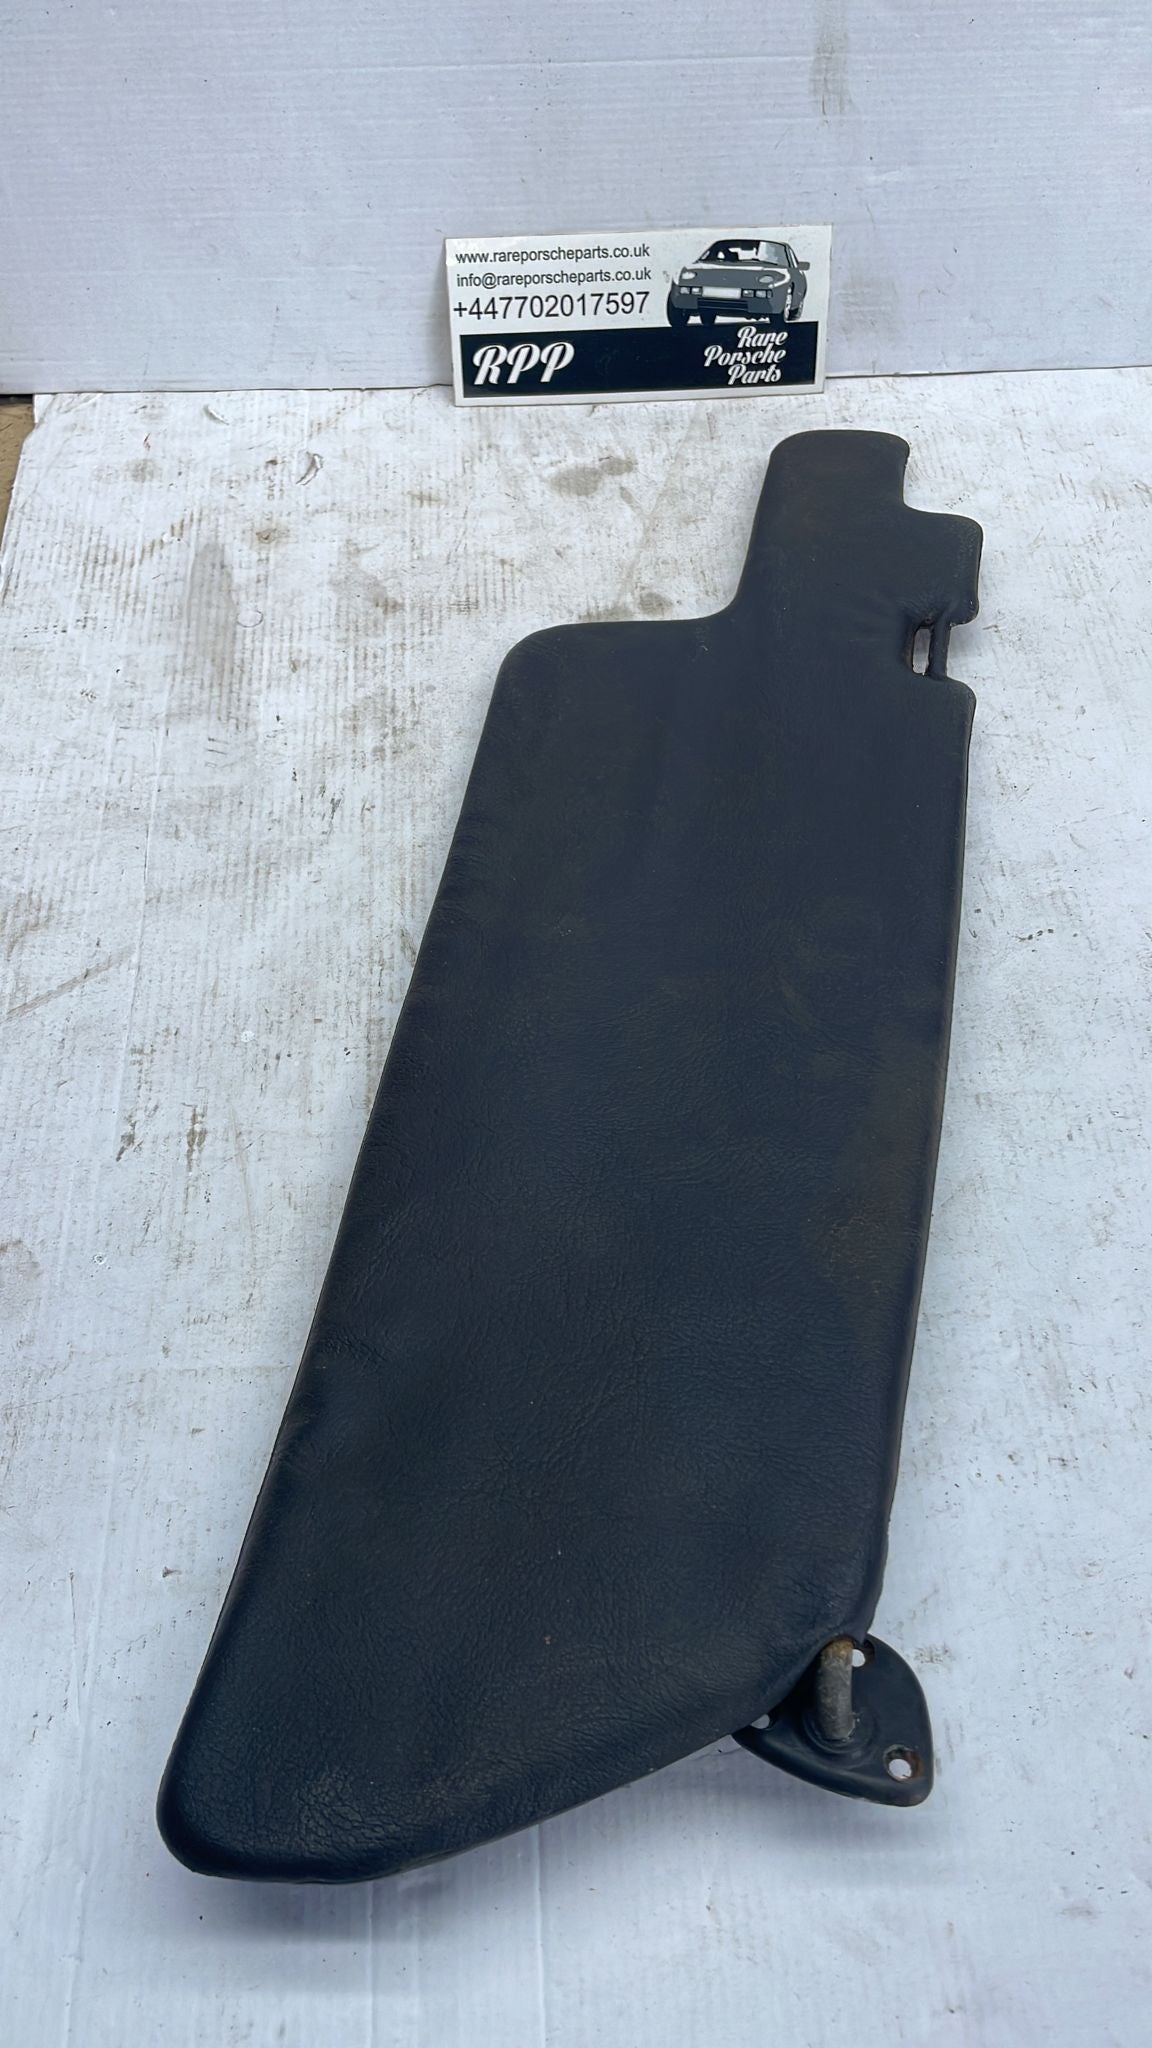 Porsche 924/944 early type right side sun visors in black, used